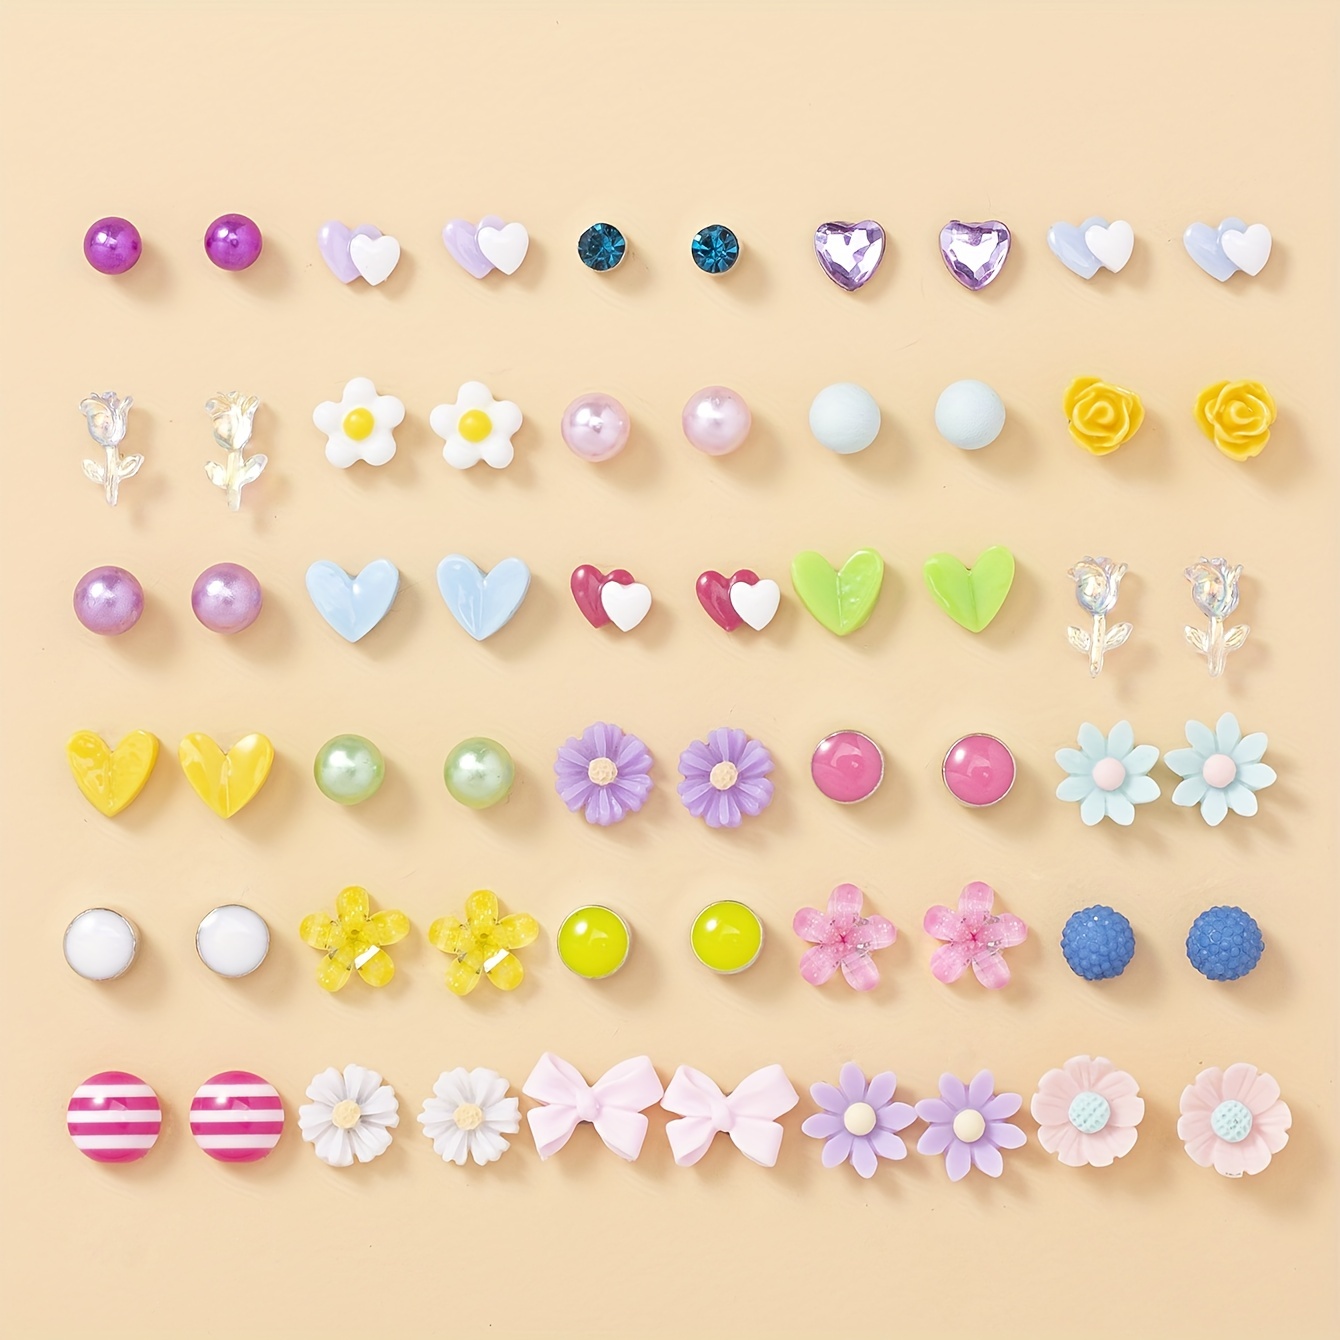 30 Pairs of Stylish Stud Earrings | Free Shipping & Returns